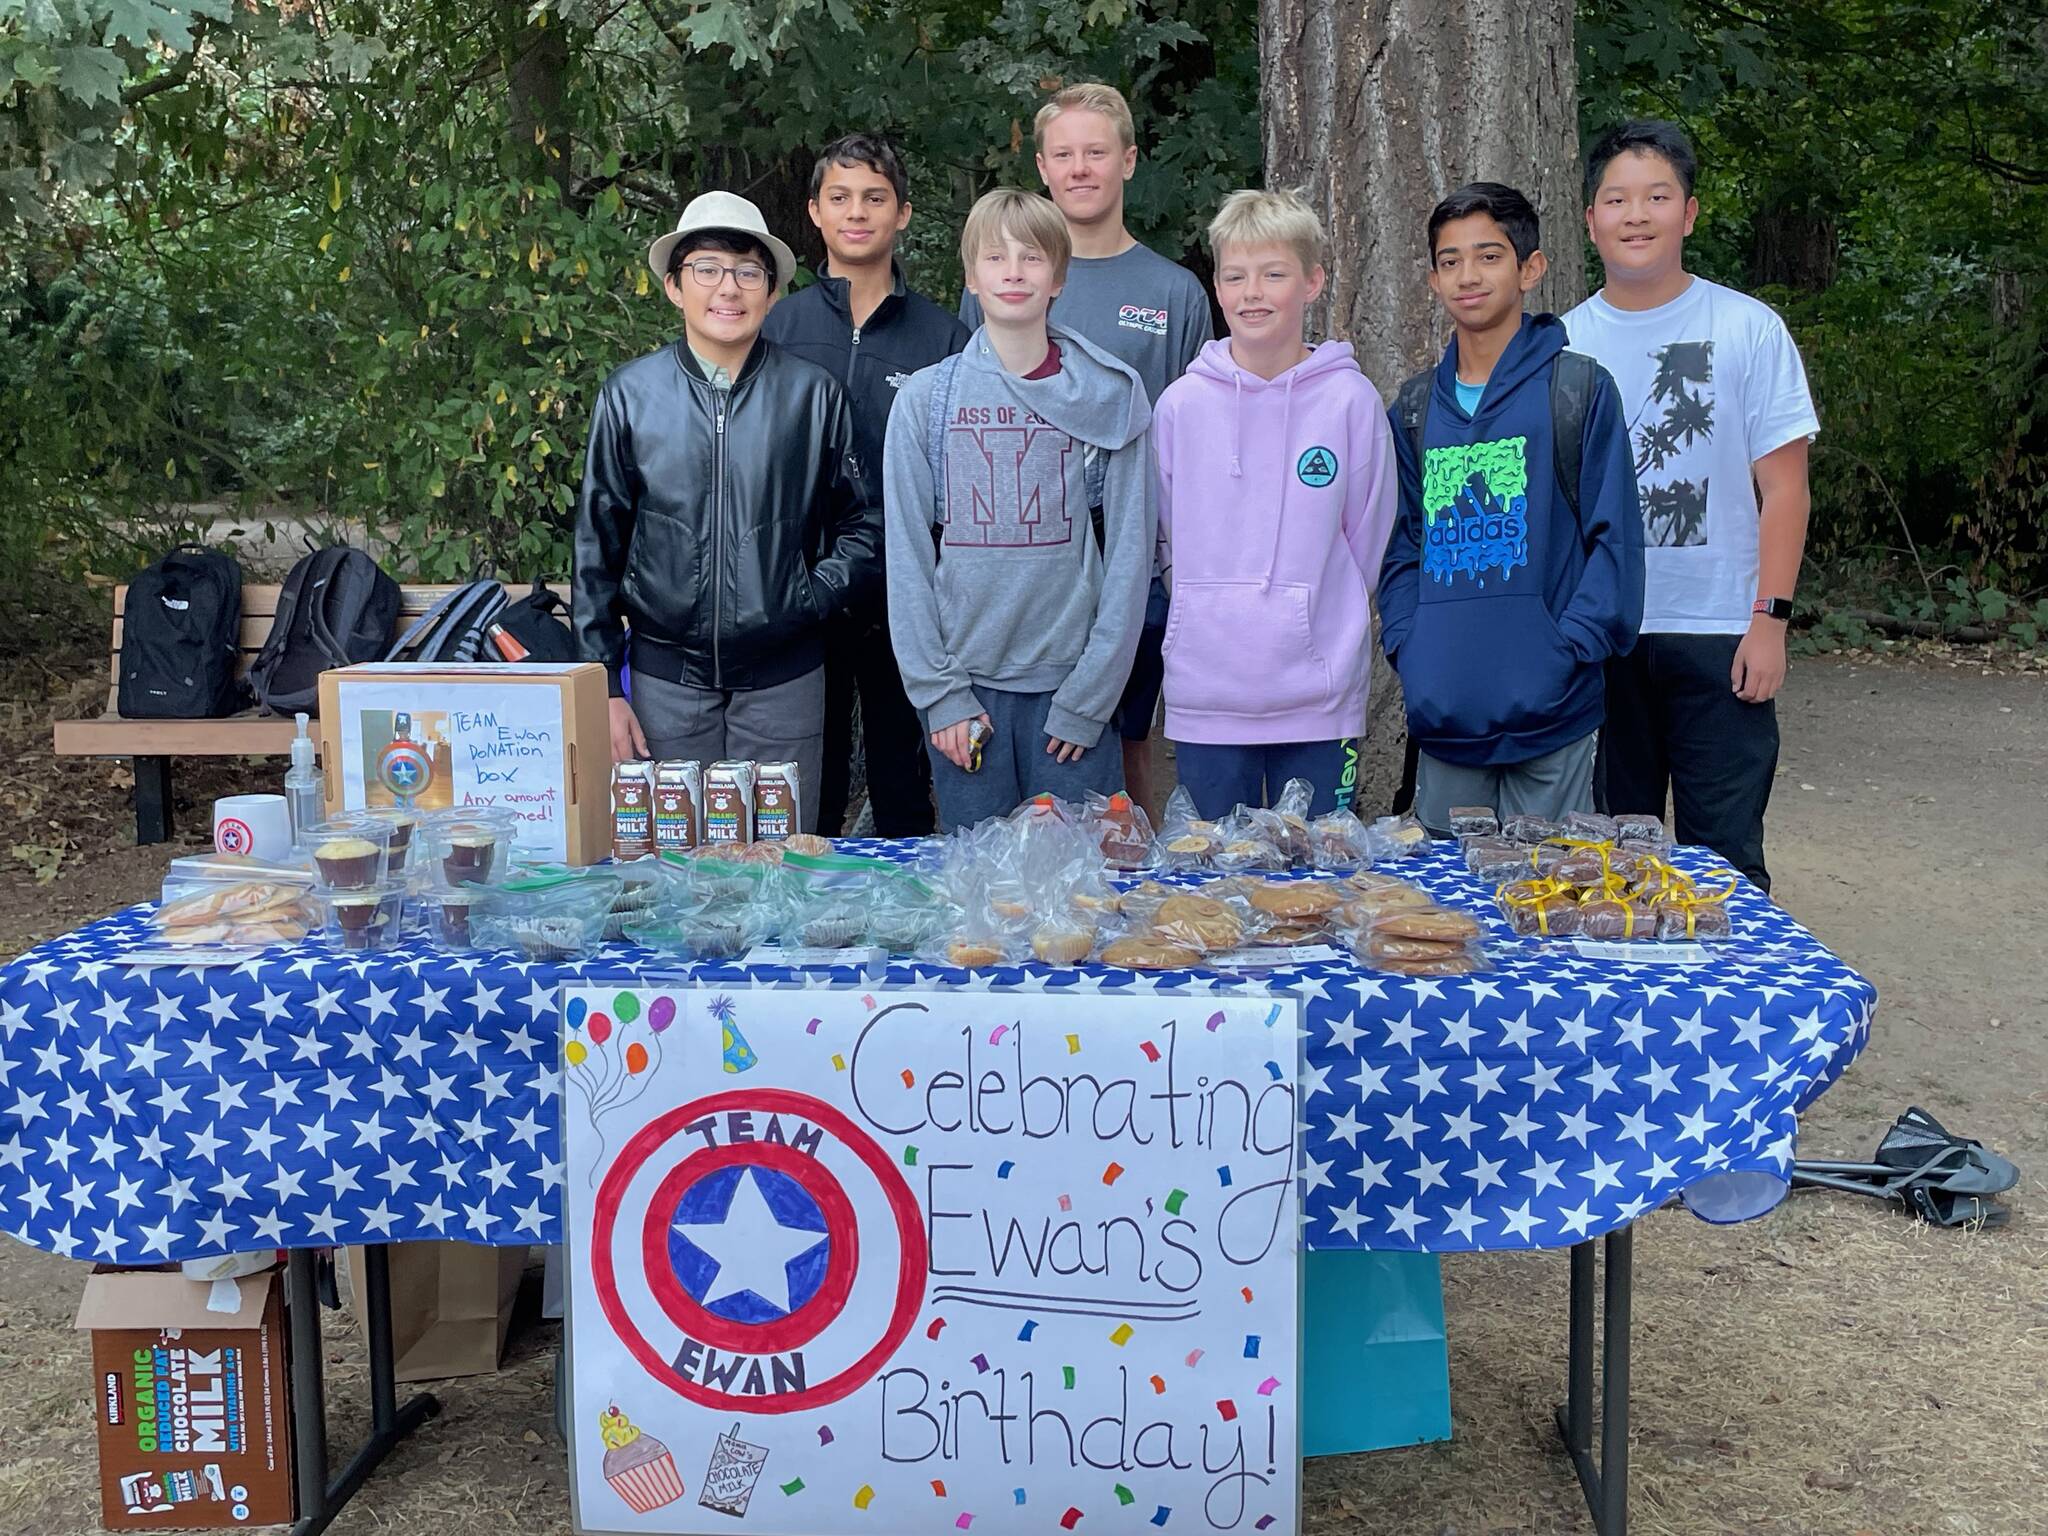 Courtesy photo
Islander Middle School eighth-graders who held a birthday celebration for Ewan Lill are, first row, from left to right: Jibran Jawed, Matthew Duffié, Dan Cartwright and Rohan Paradekar, and second row from left to right: Vox Usman, Alex Jack and Ryunokuki Masuda.